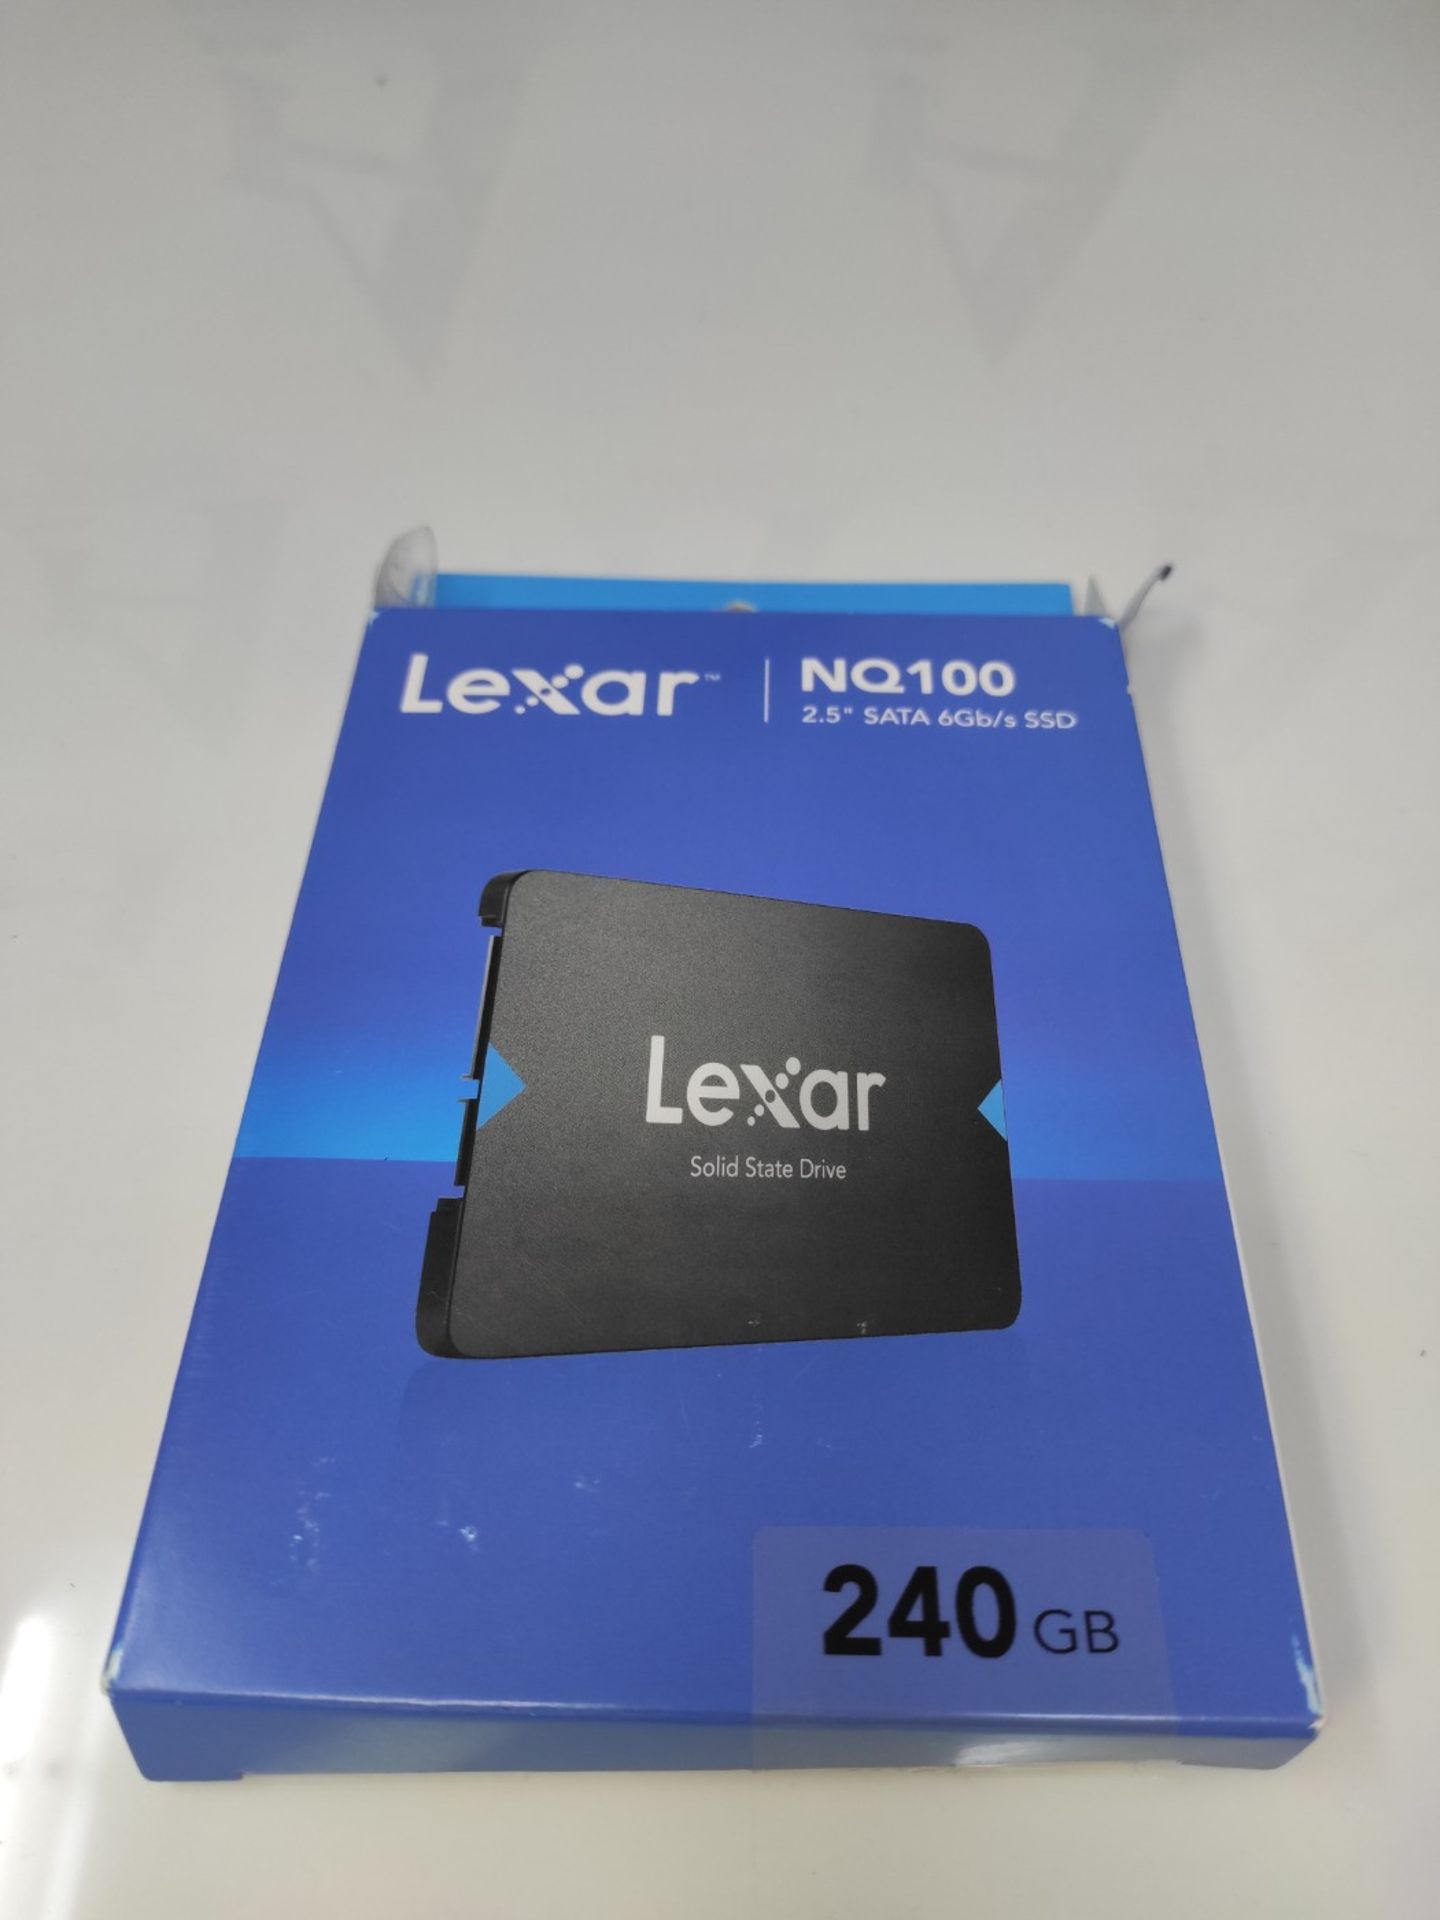 Lexar NQ100 2.5" SATA III (6 Gb/s) 240 GB SSD, Up to 550 MB/s Read Solid State Drive, - Image 2 of 6